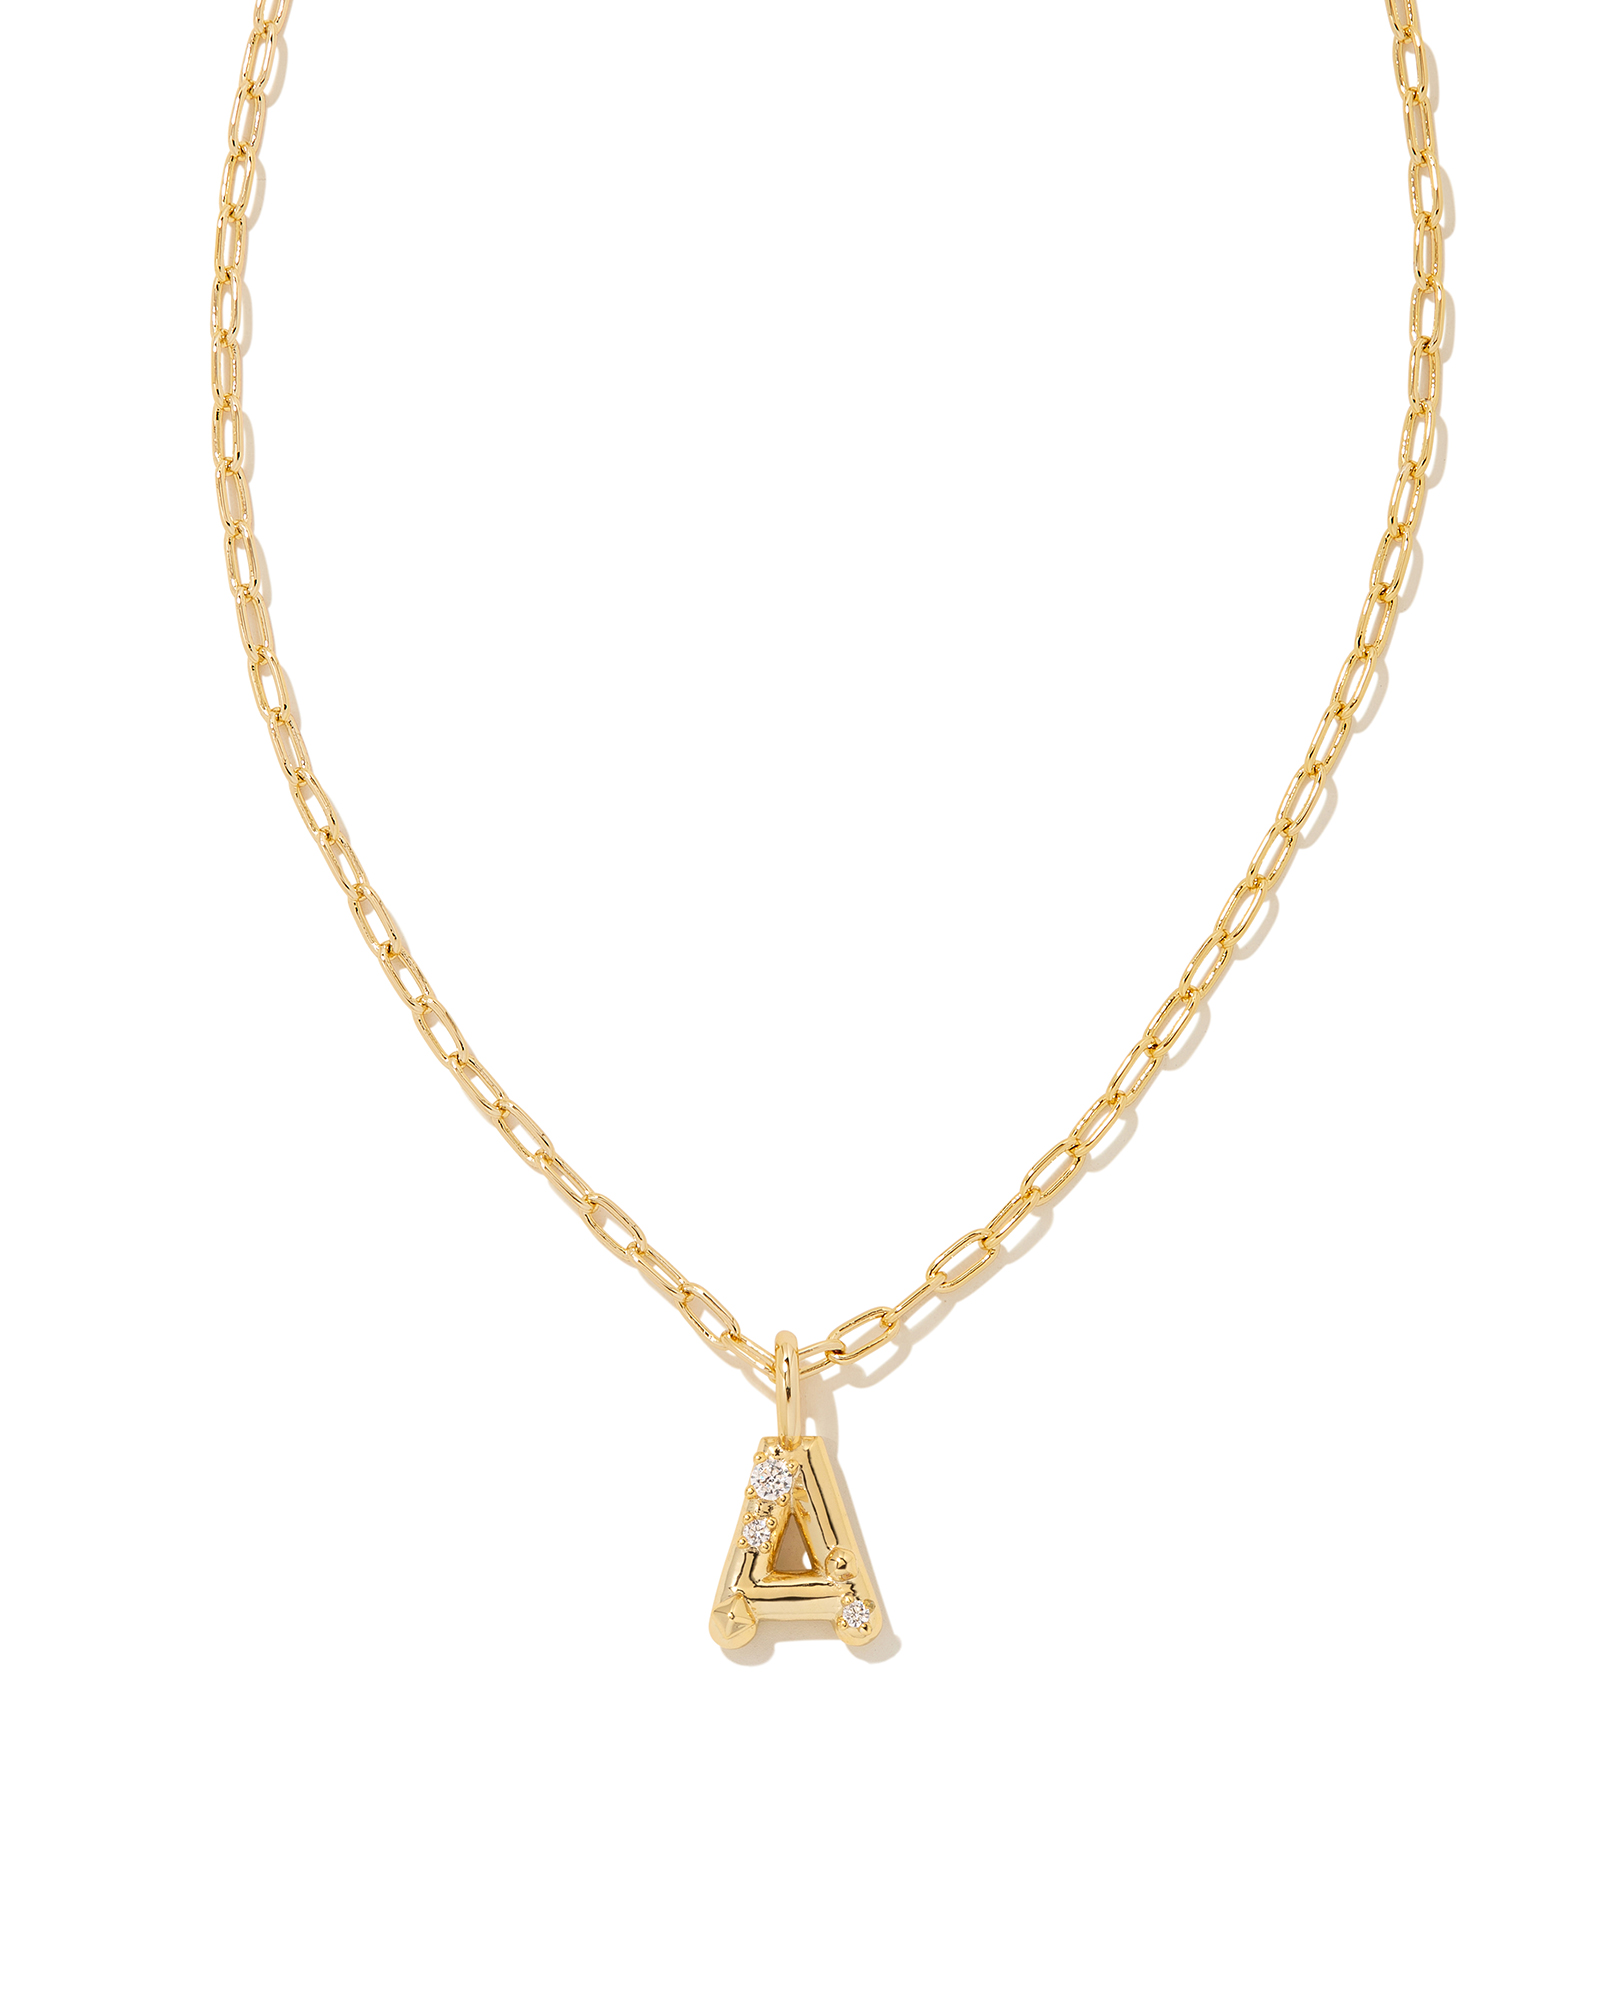 sterling/gold fill small initial necklace – Marlyn Schiff, LLC